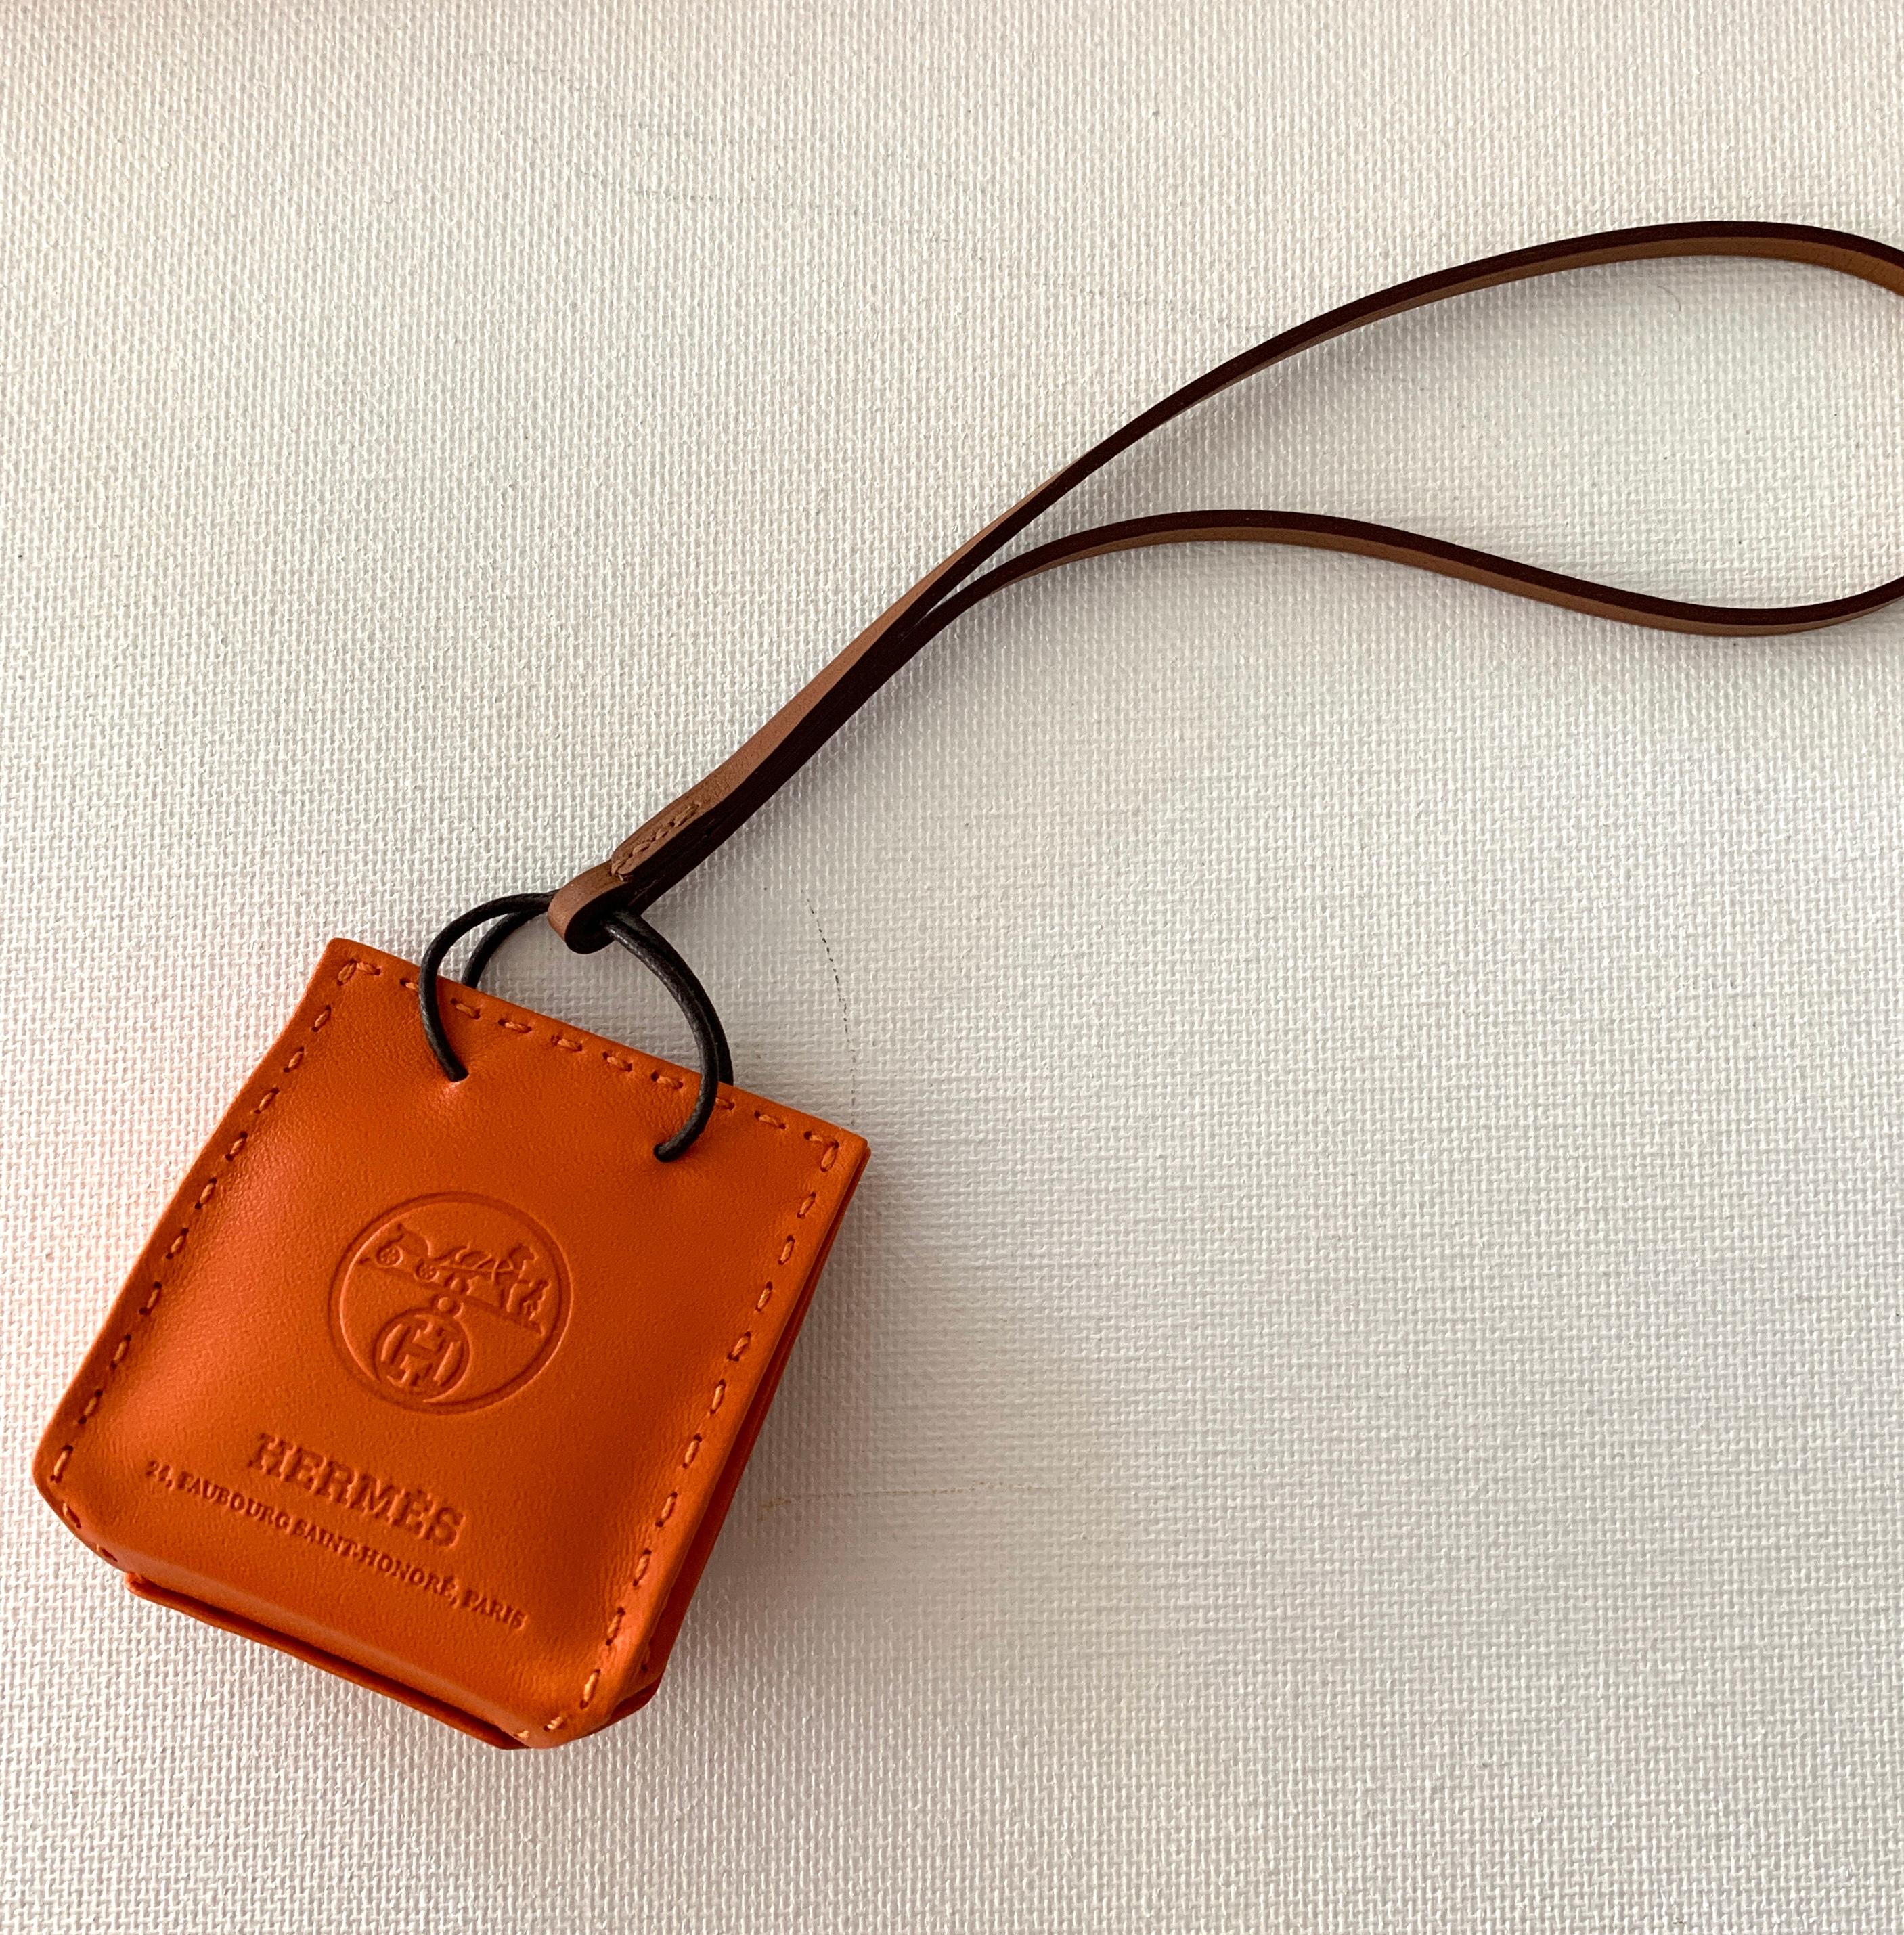 New Release
Hermes Orange Leather Shopping Bag Charm
Condition is New never worn
Measures 2.25